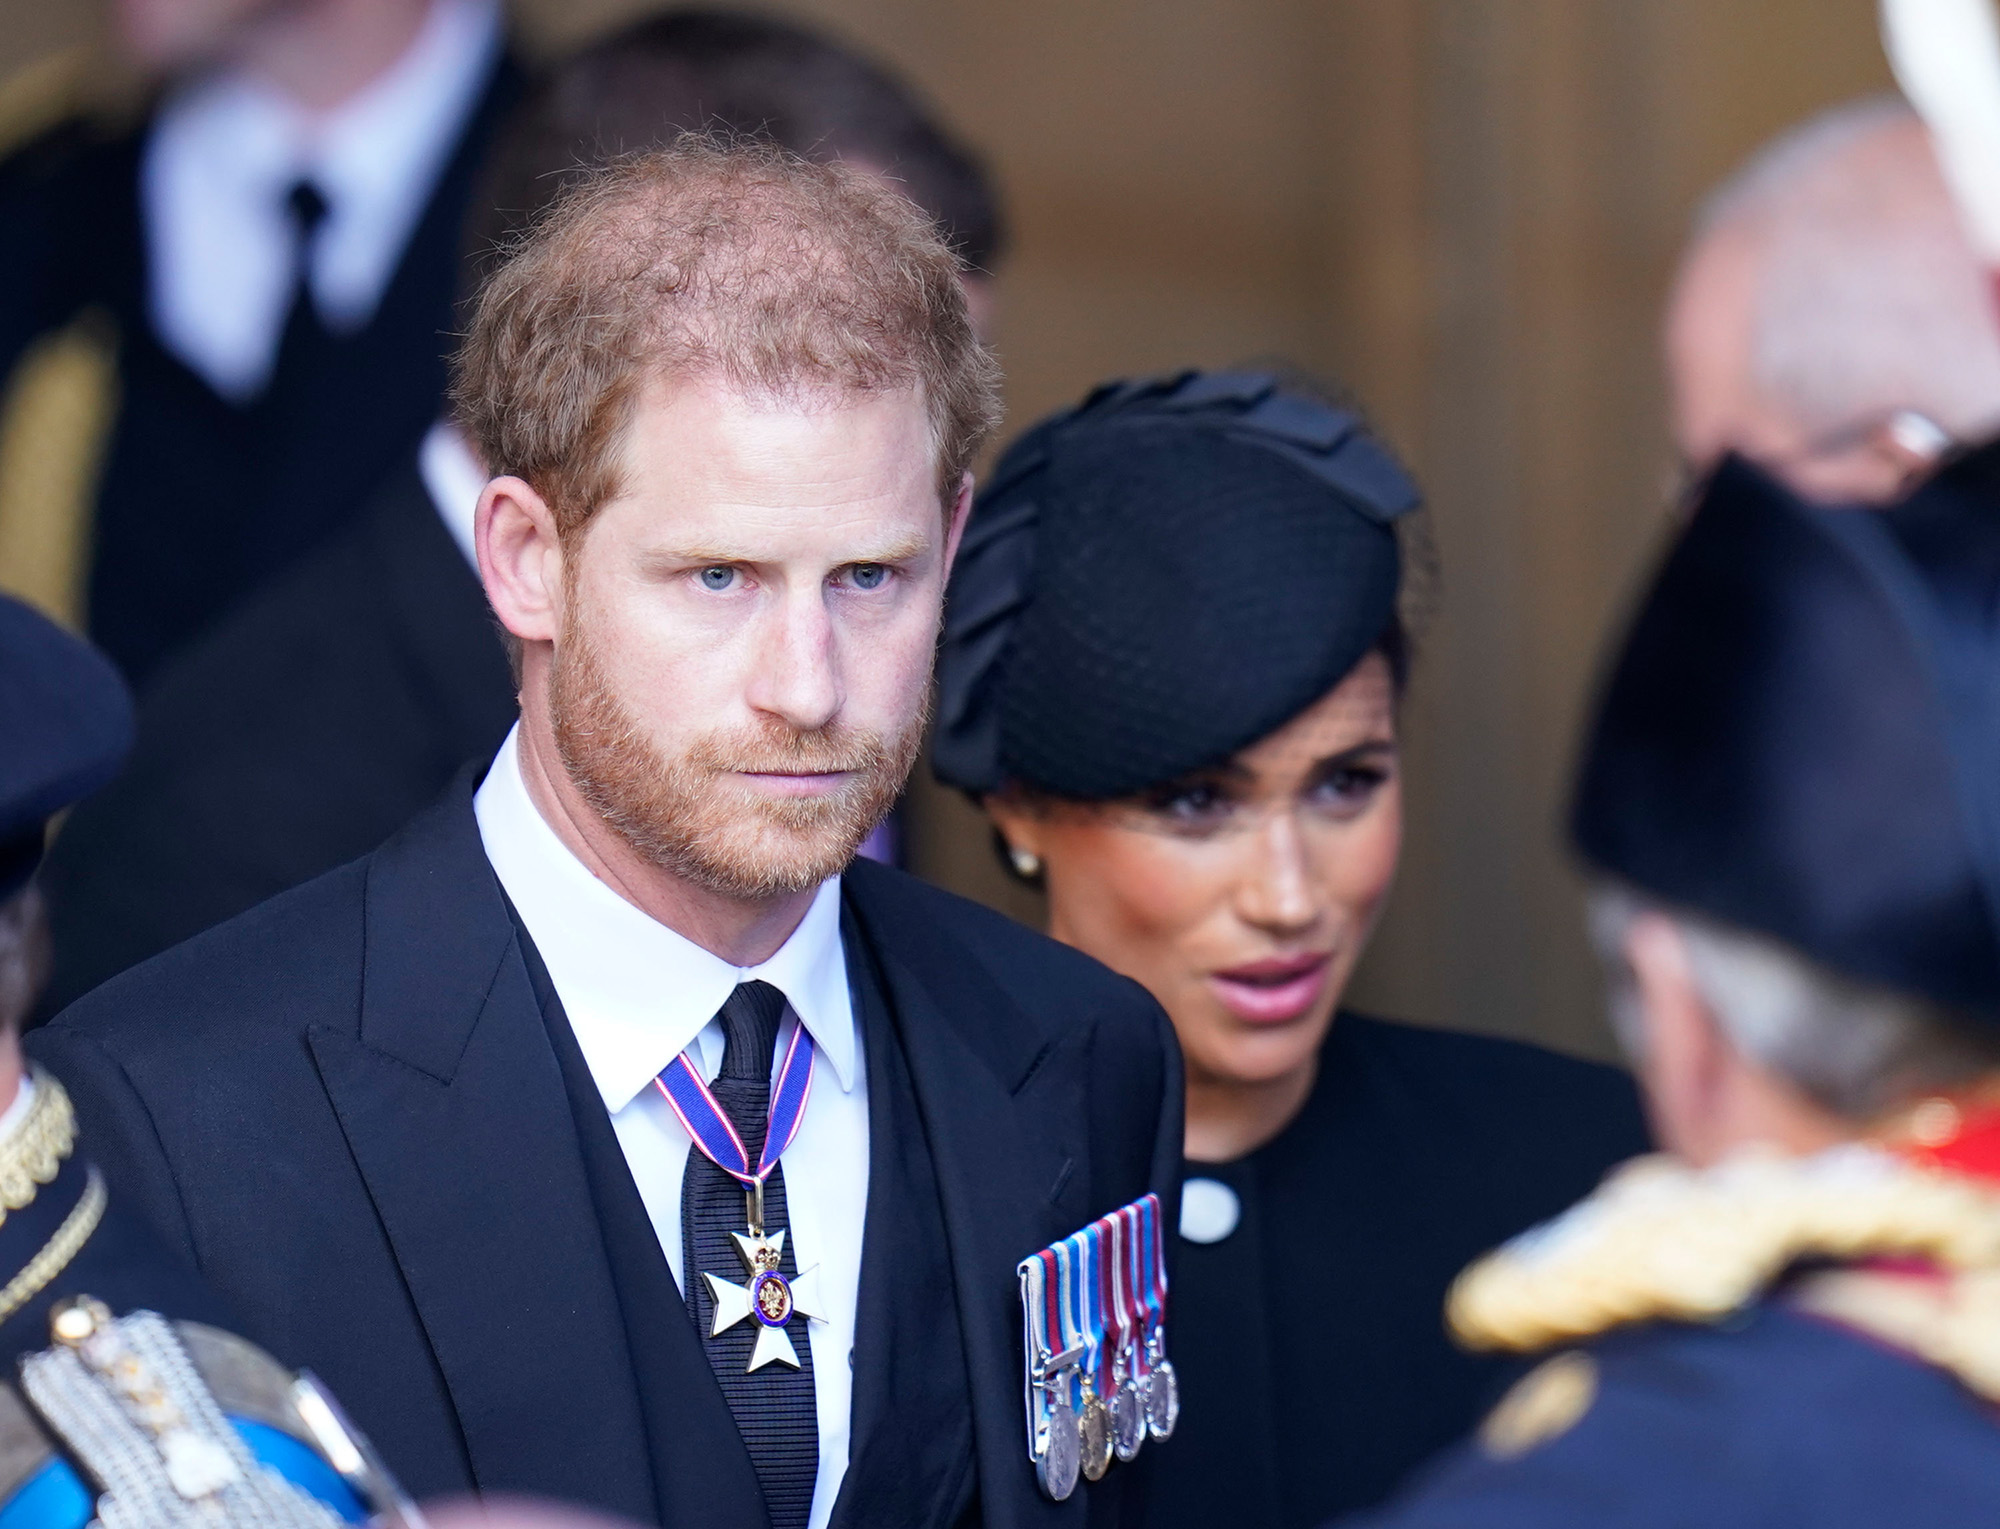 Prince Harry to attend Charles' coronation, Meghan to stay in California